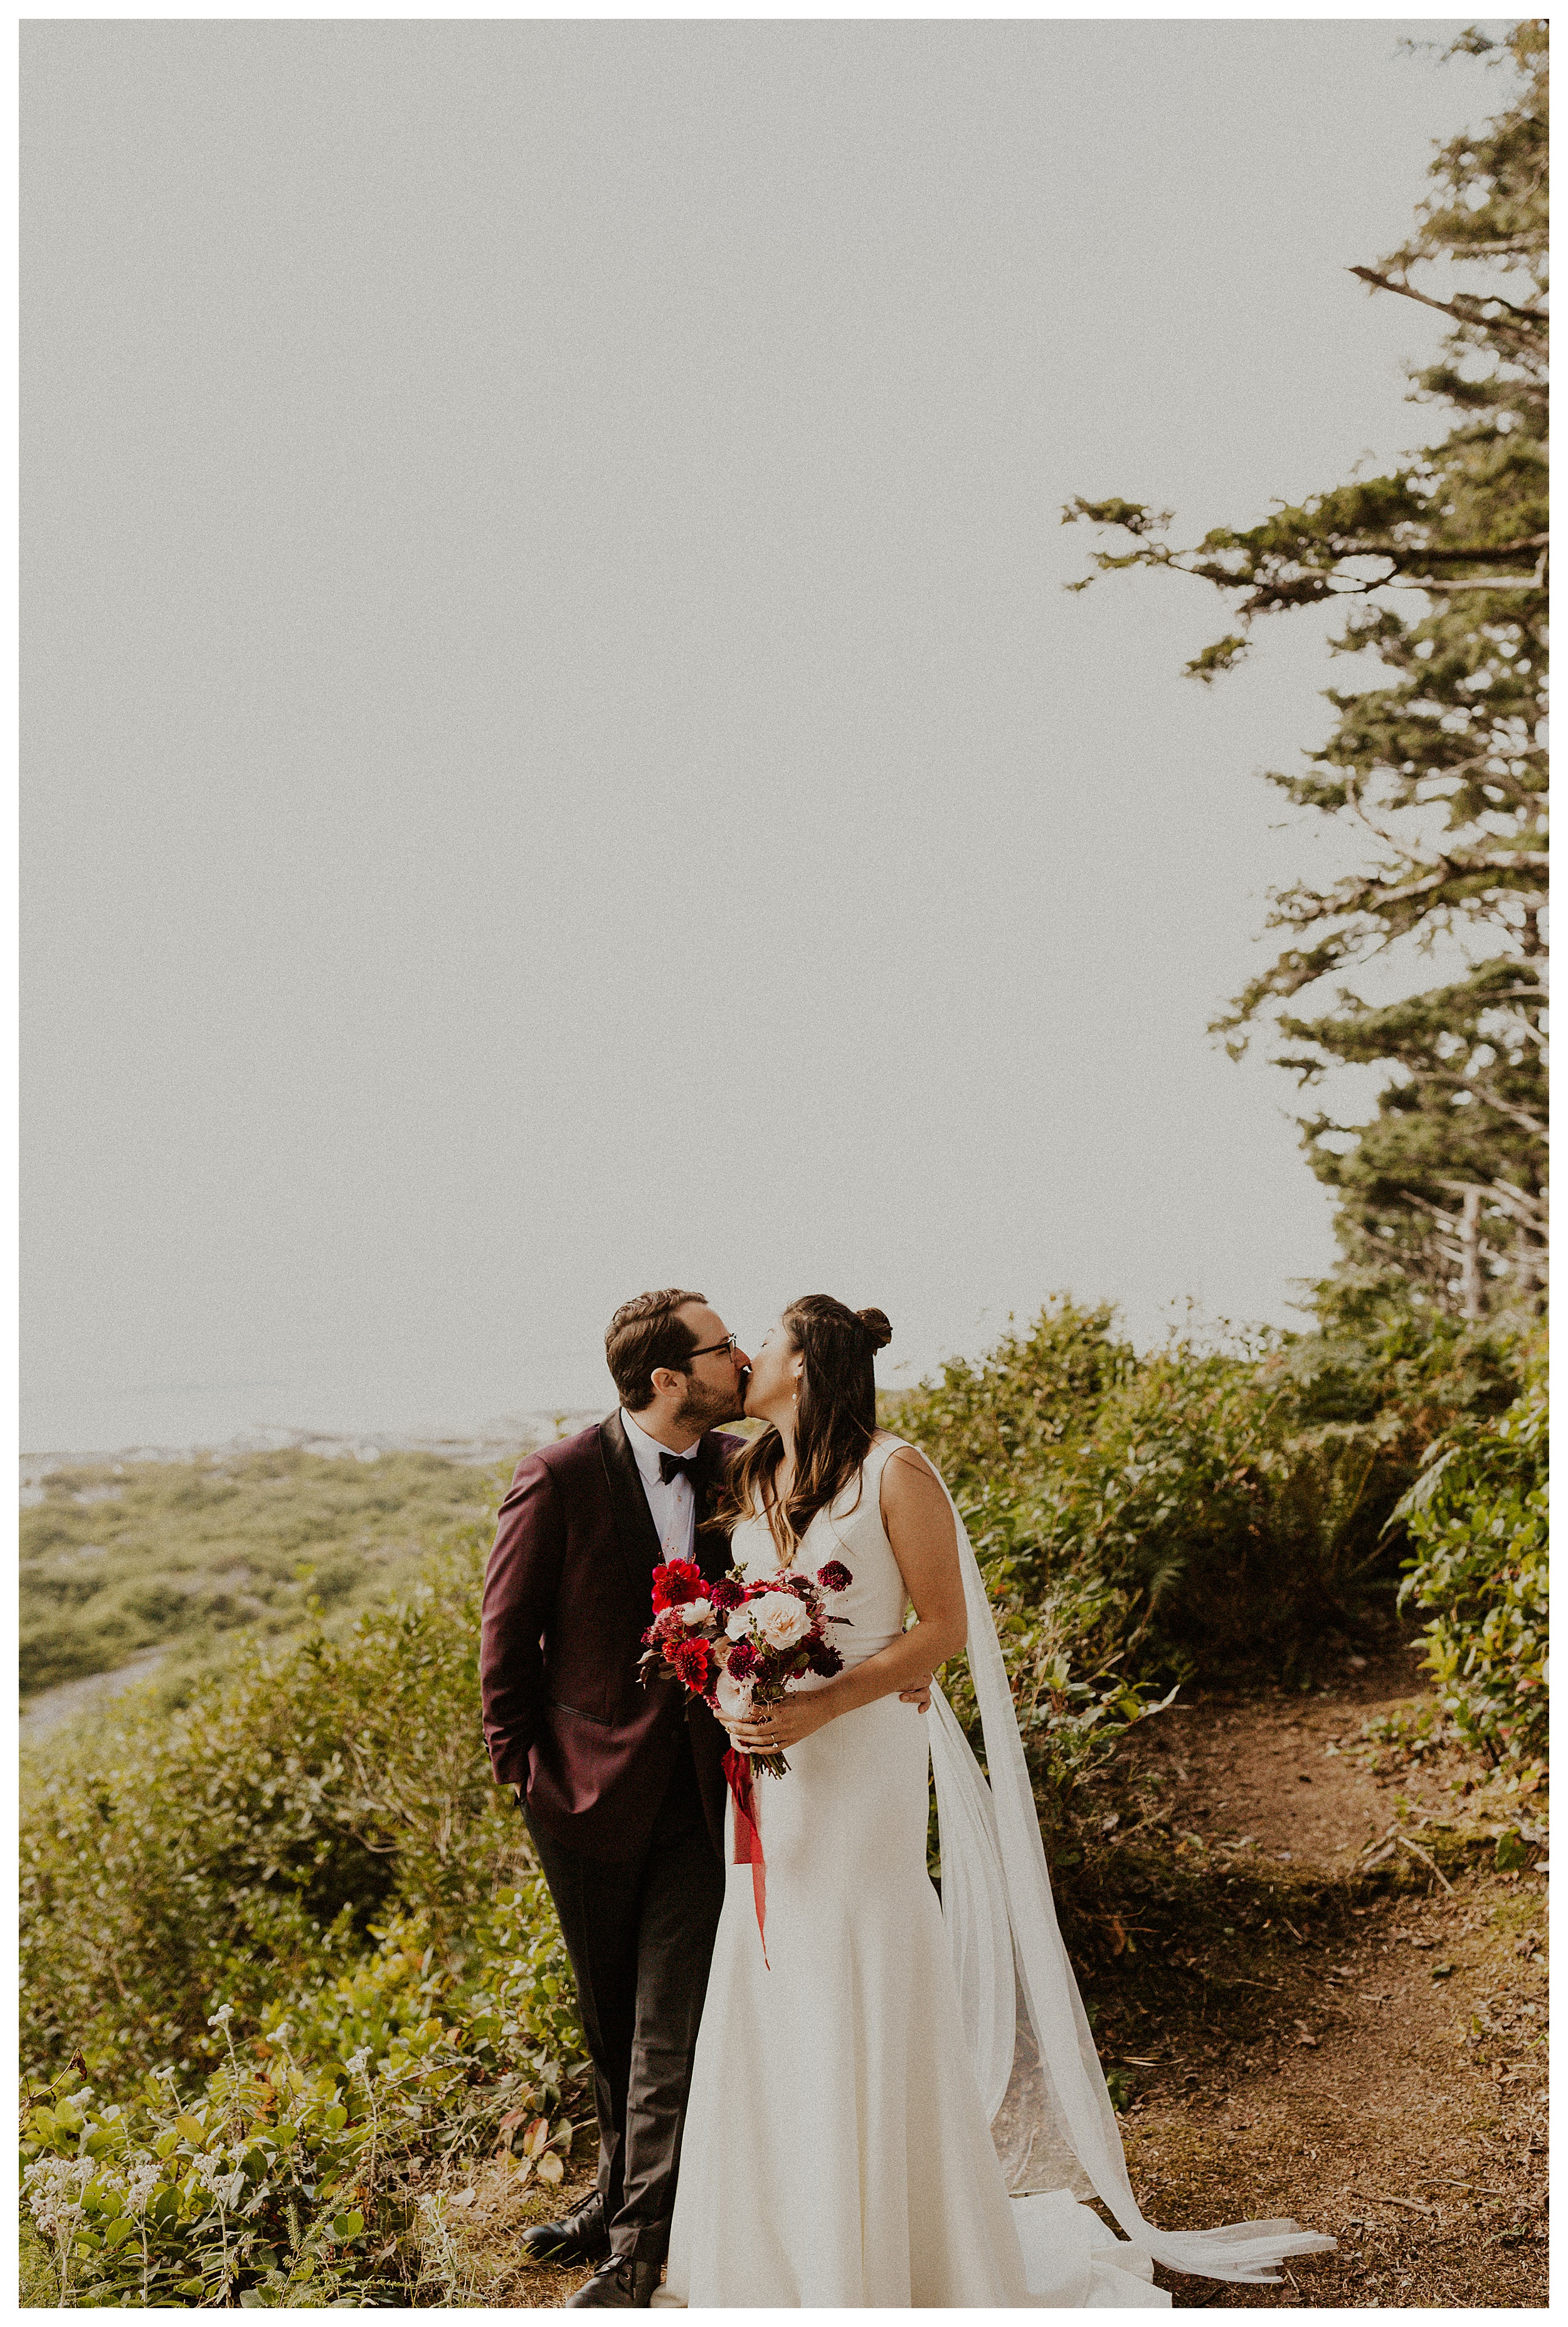 bride and groom kissing olympic national park forest landscape

